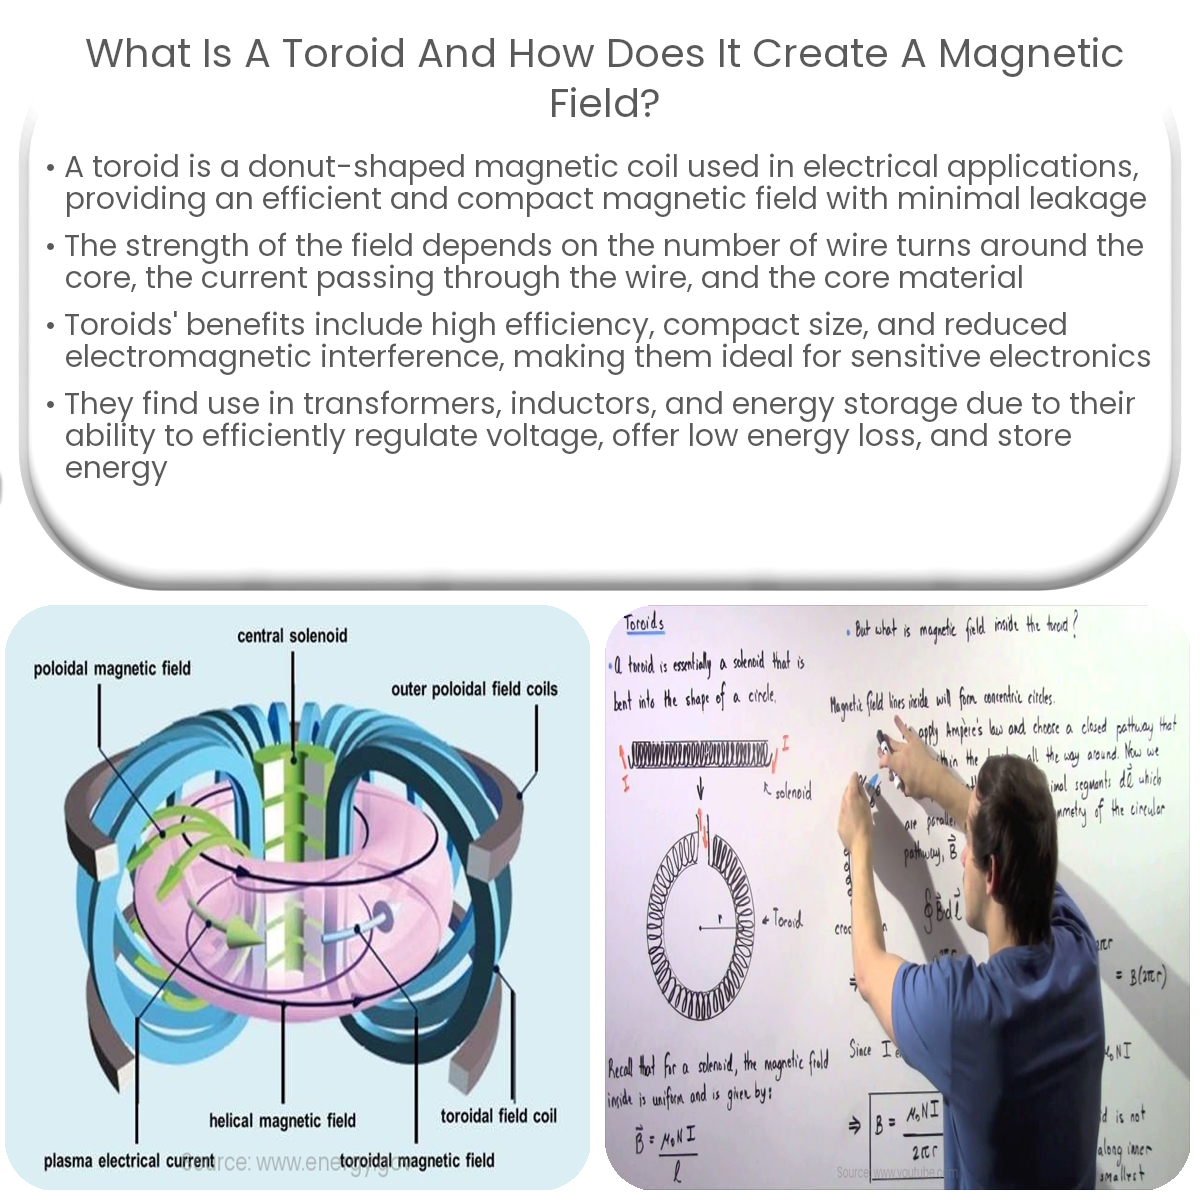 What is a toroid and how does it create a magnetic field?